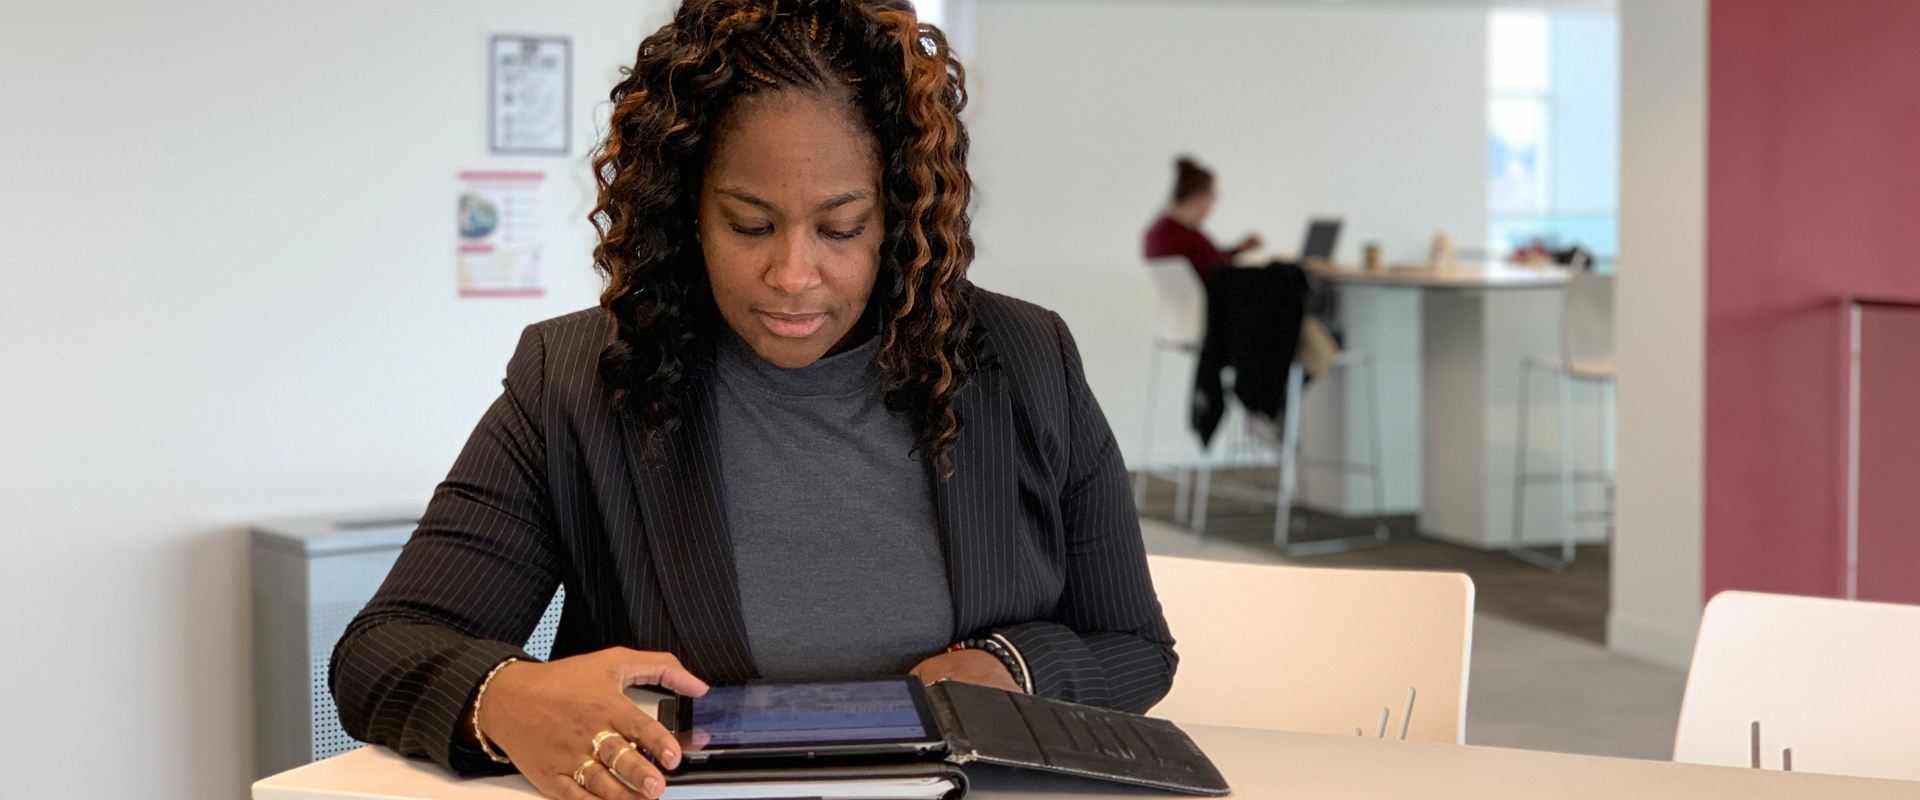 Business woman working on a tablet